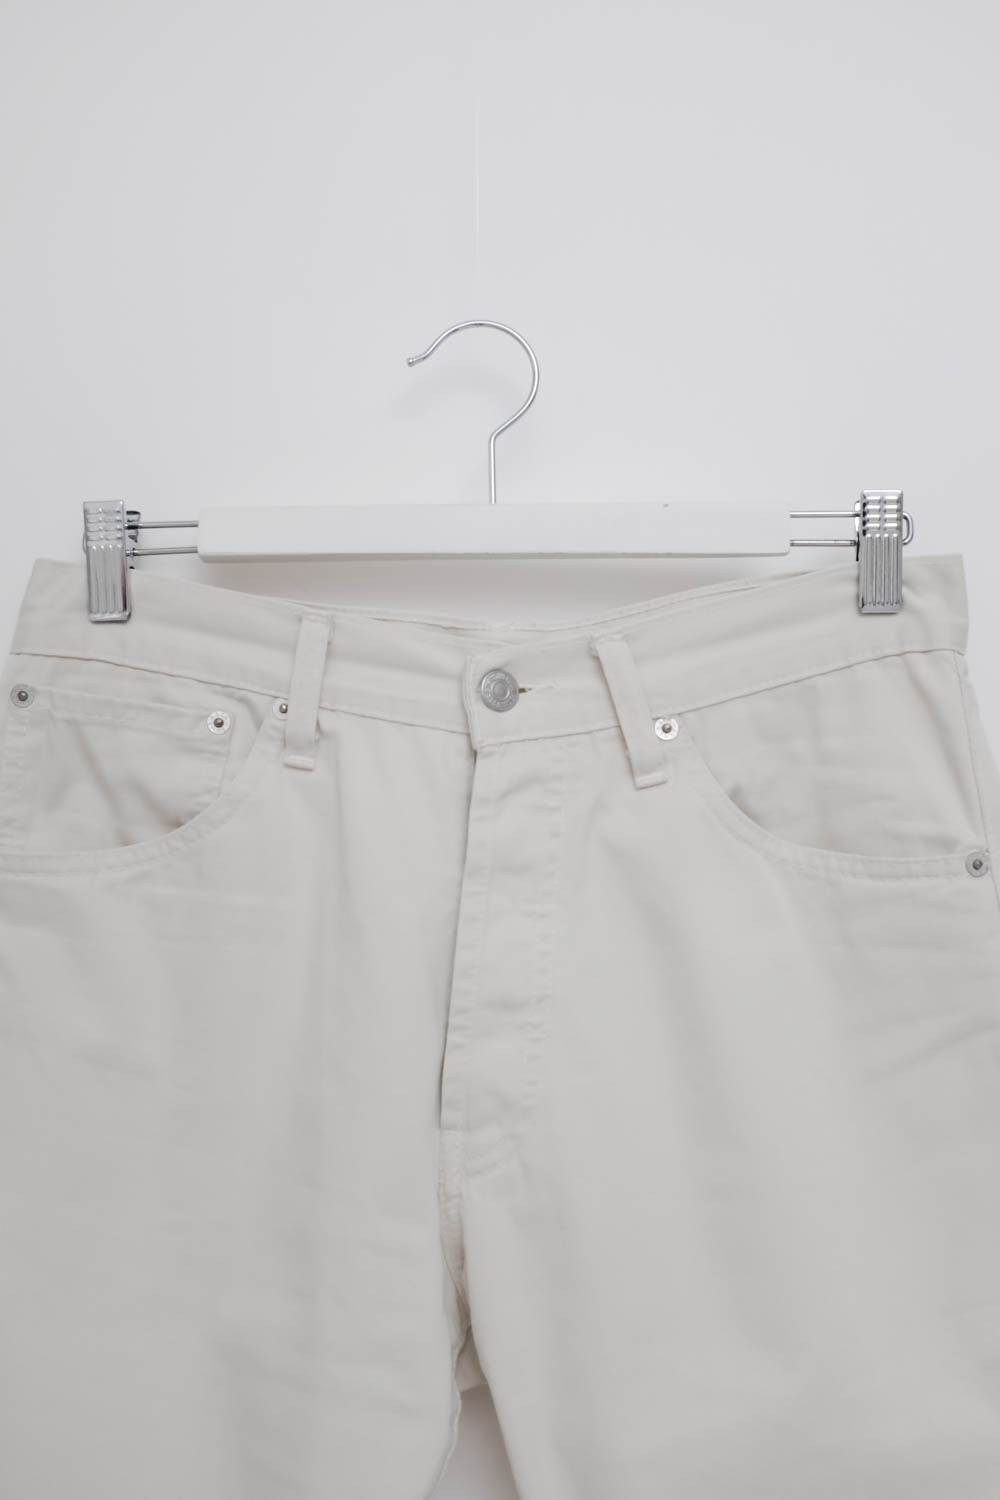 0034_LEVIS OFF WHITE JEANS